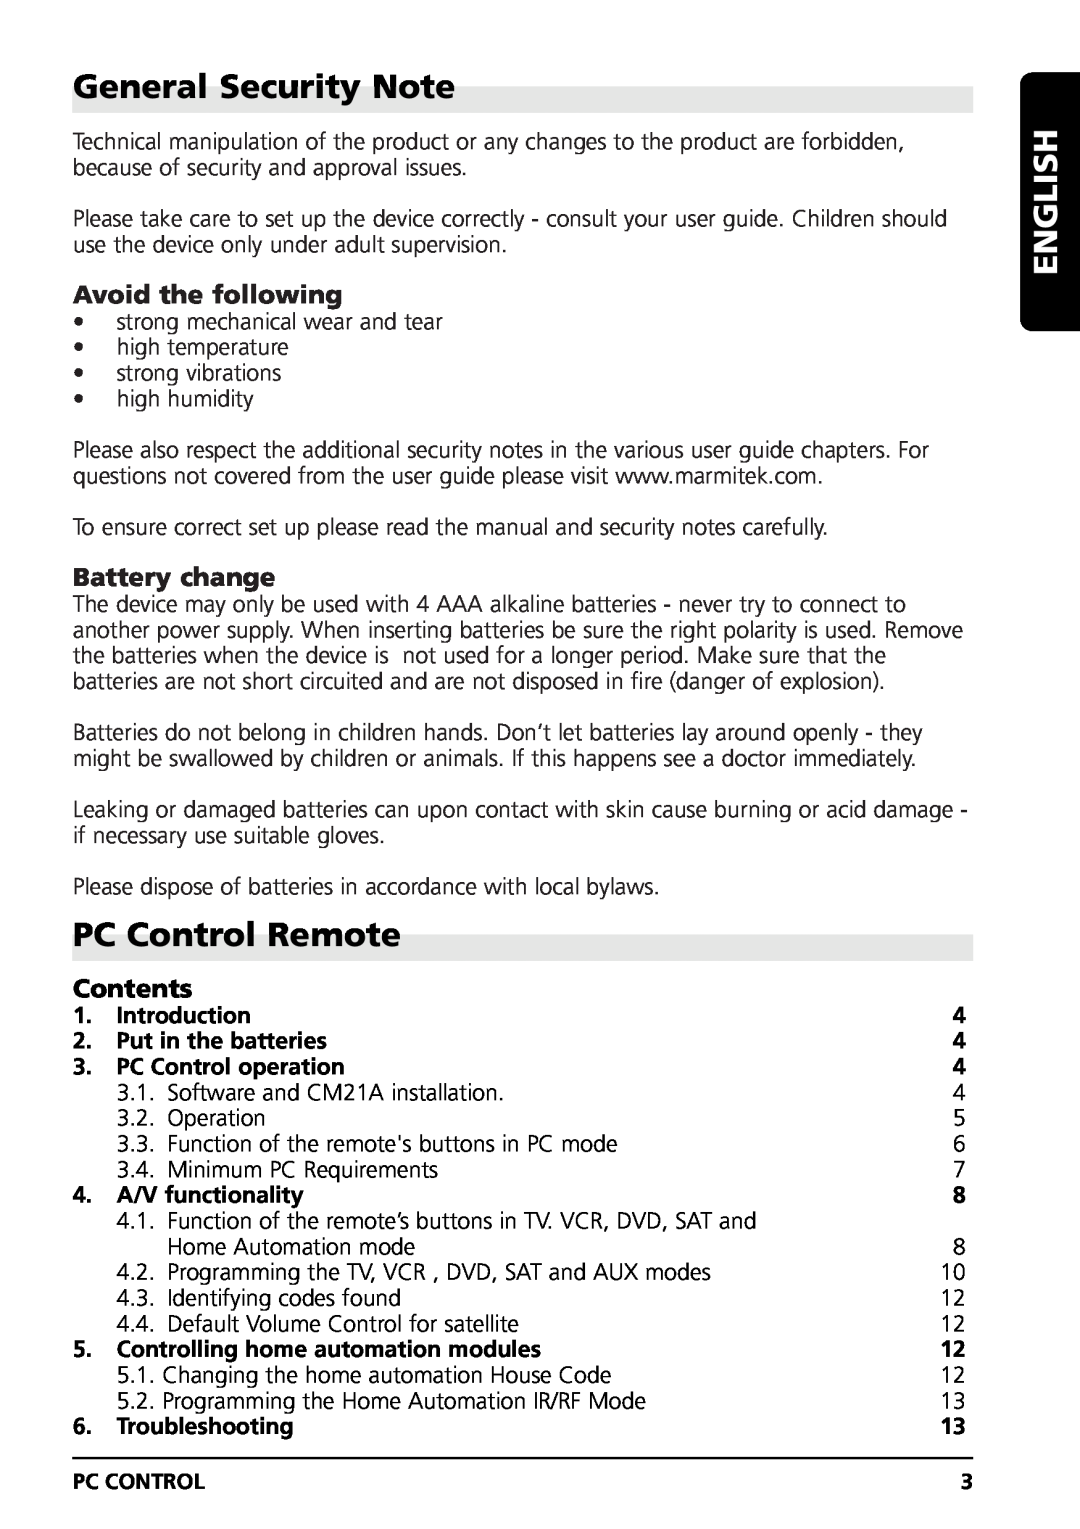 Marmitek PC CONTROL General Security Note, PC Control Remote, English, Avoid the following, Battery change, Contents 